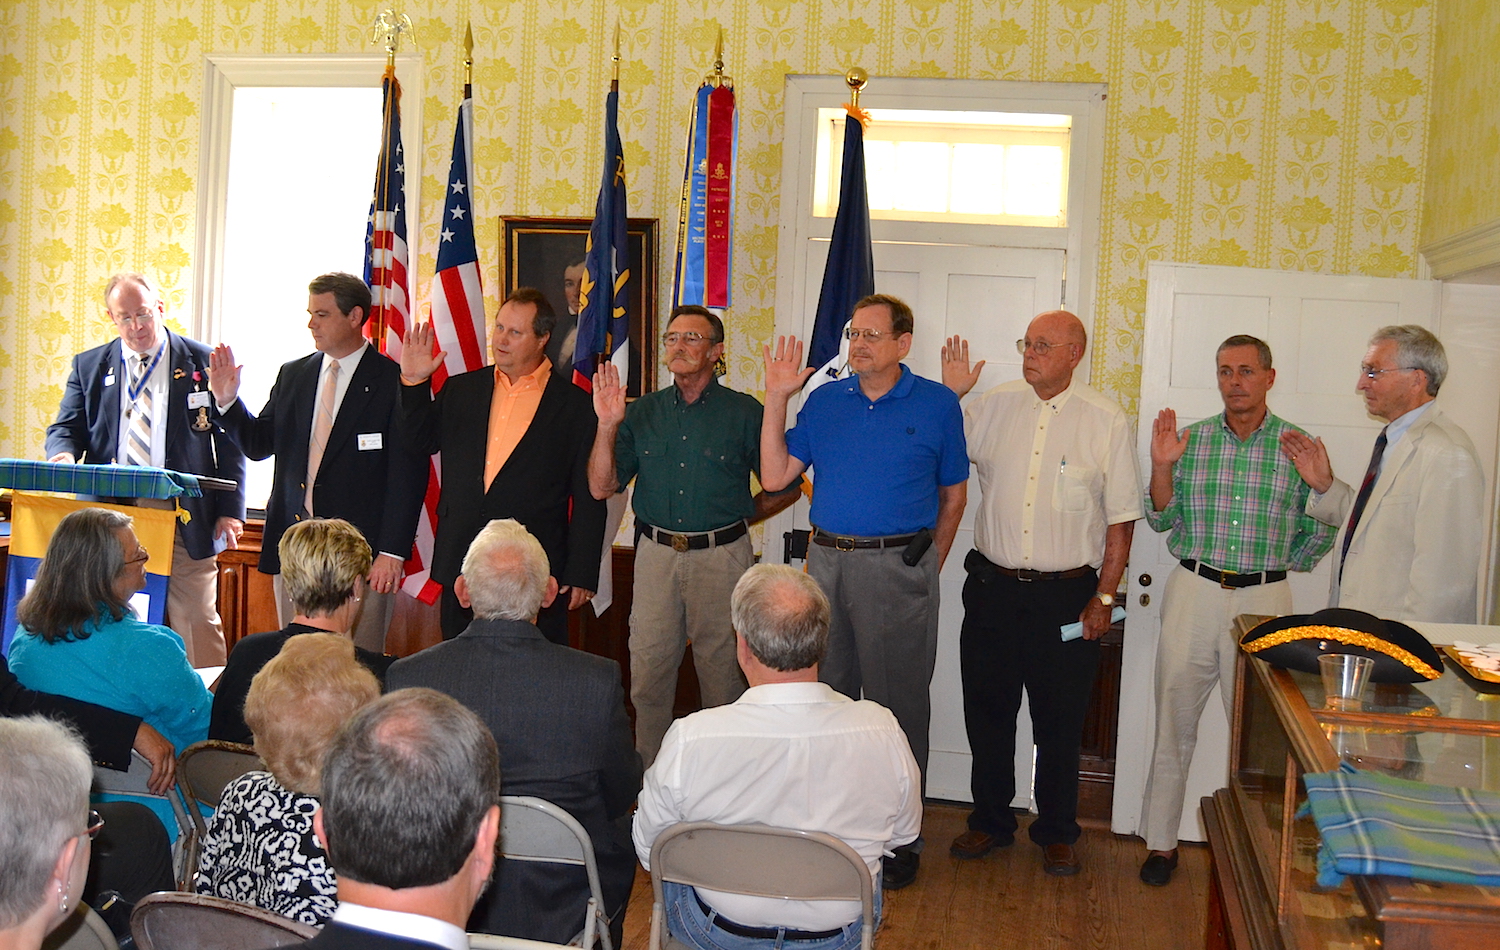 Charter members of the COL Alexander Erwin chapter take their SAR membership oaths on September 12 2015.